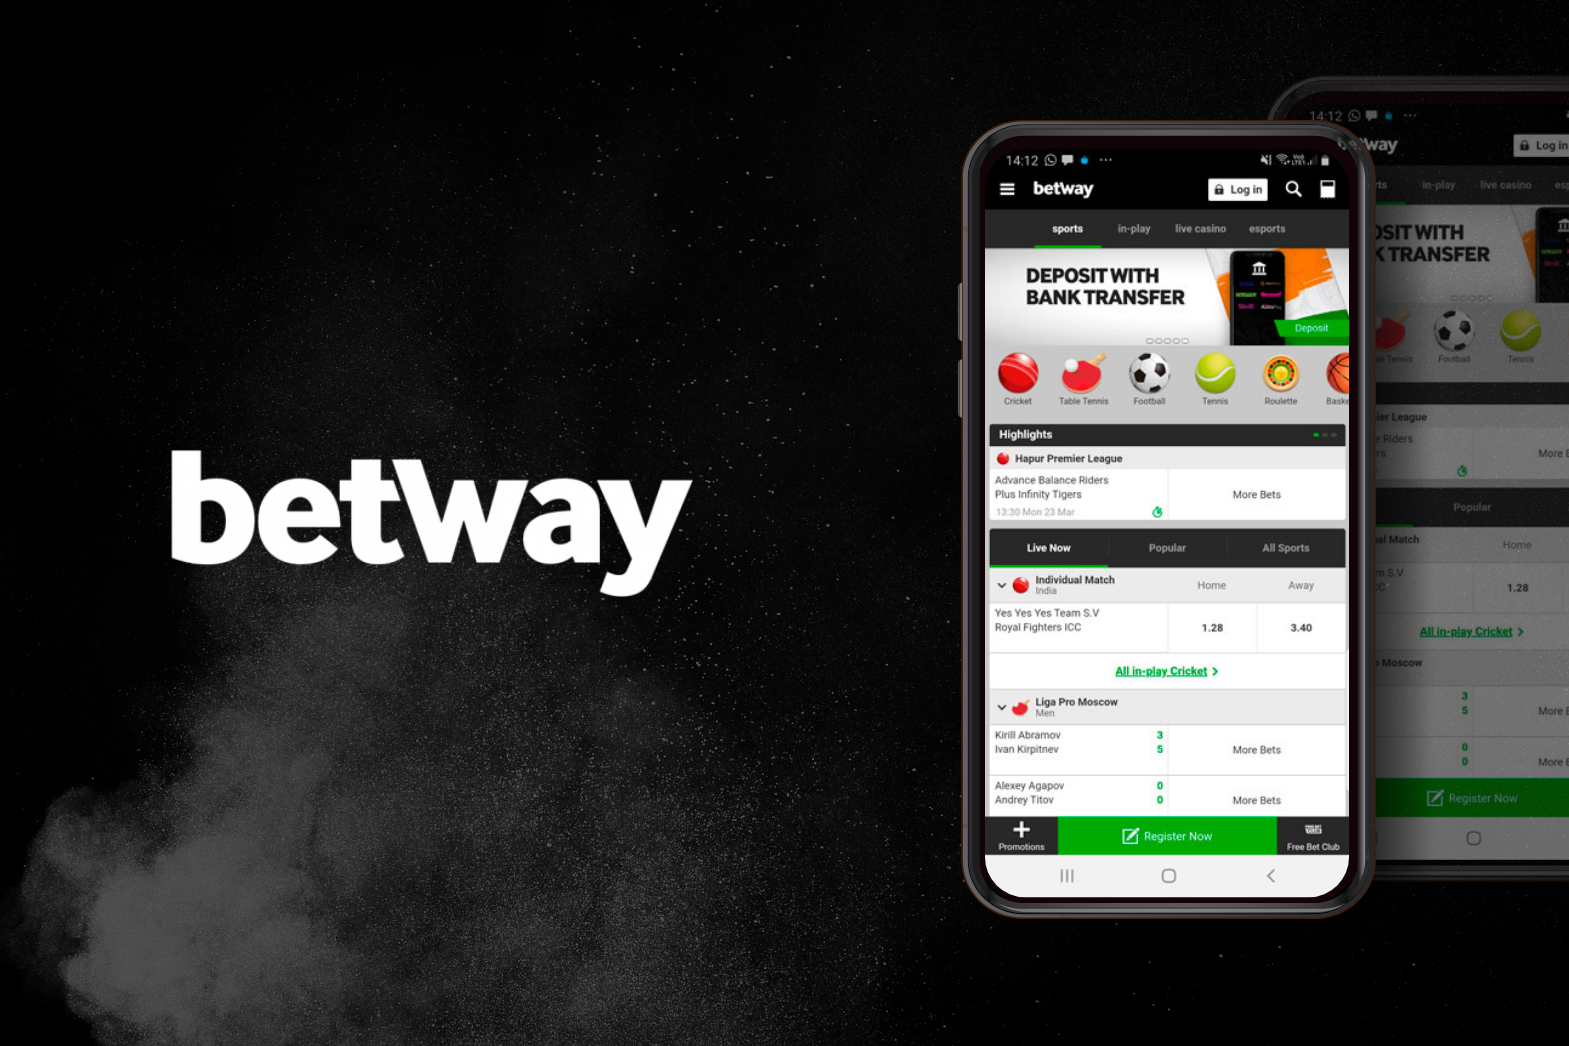 The Benefits Of Registration The Betway App For Online Betting - NTU